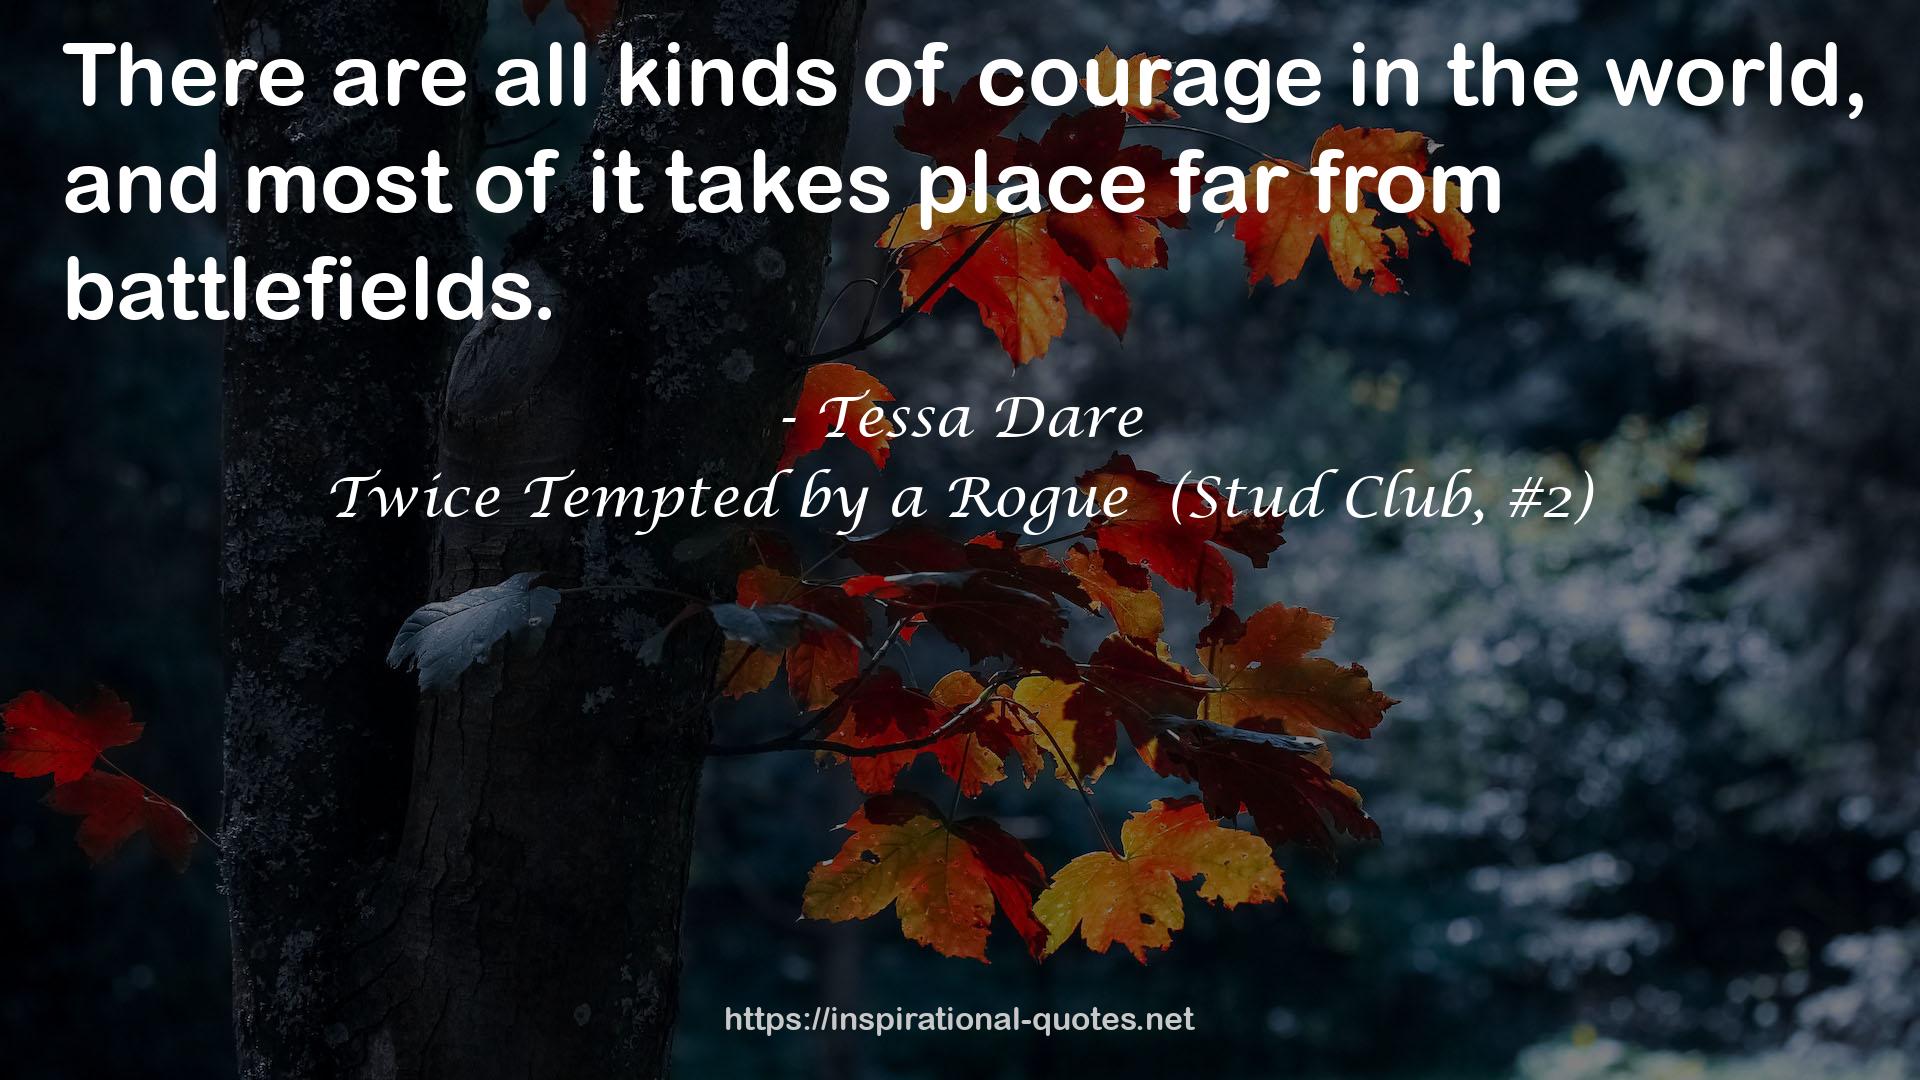 Twice Tempted by a Rogue  (Stud Club, #2) QUOTES